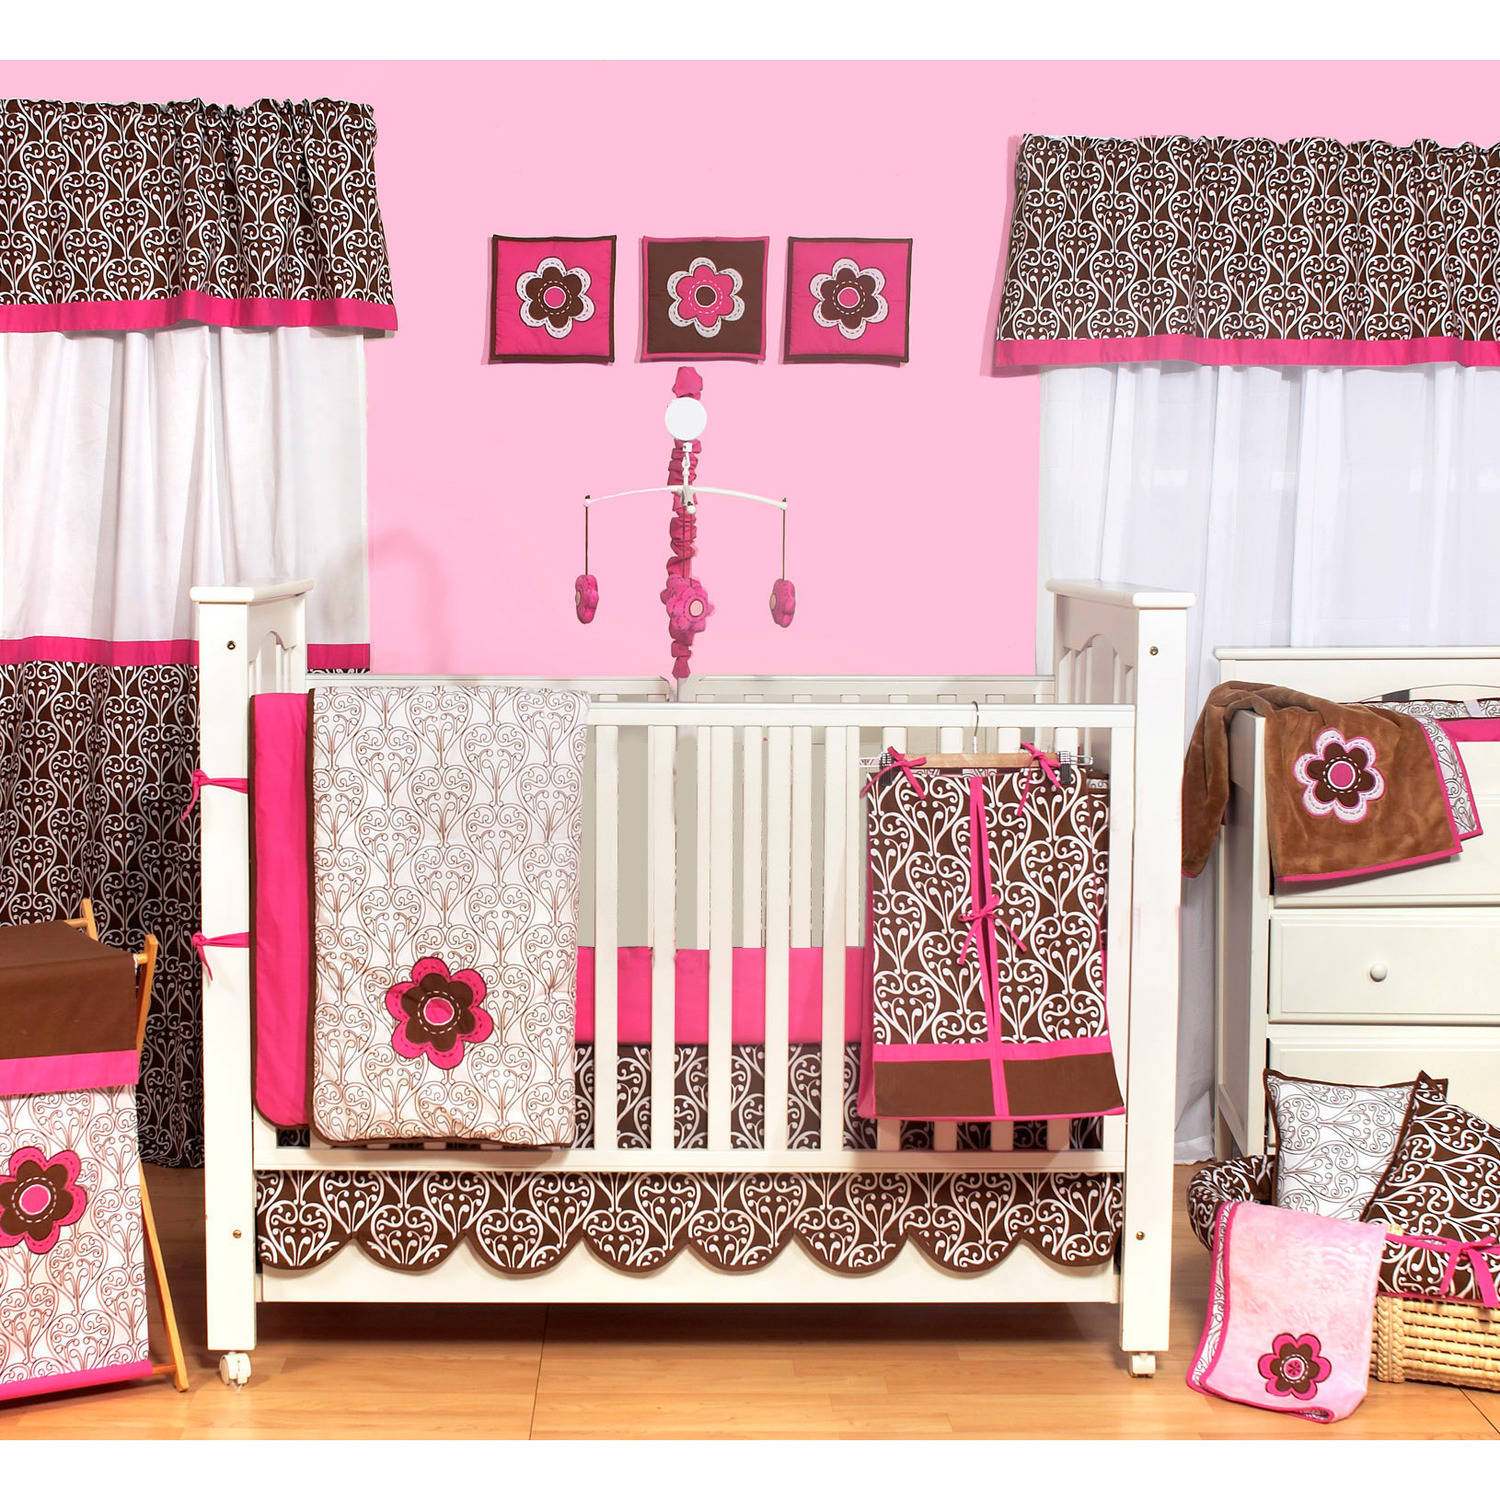 Bacati - Floral Damask Pink/Chocolate Girls 10-Piece Nursery-in-a-Bag Crib Bedding Set 100 % Cotton Percale - image 1 of 10